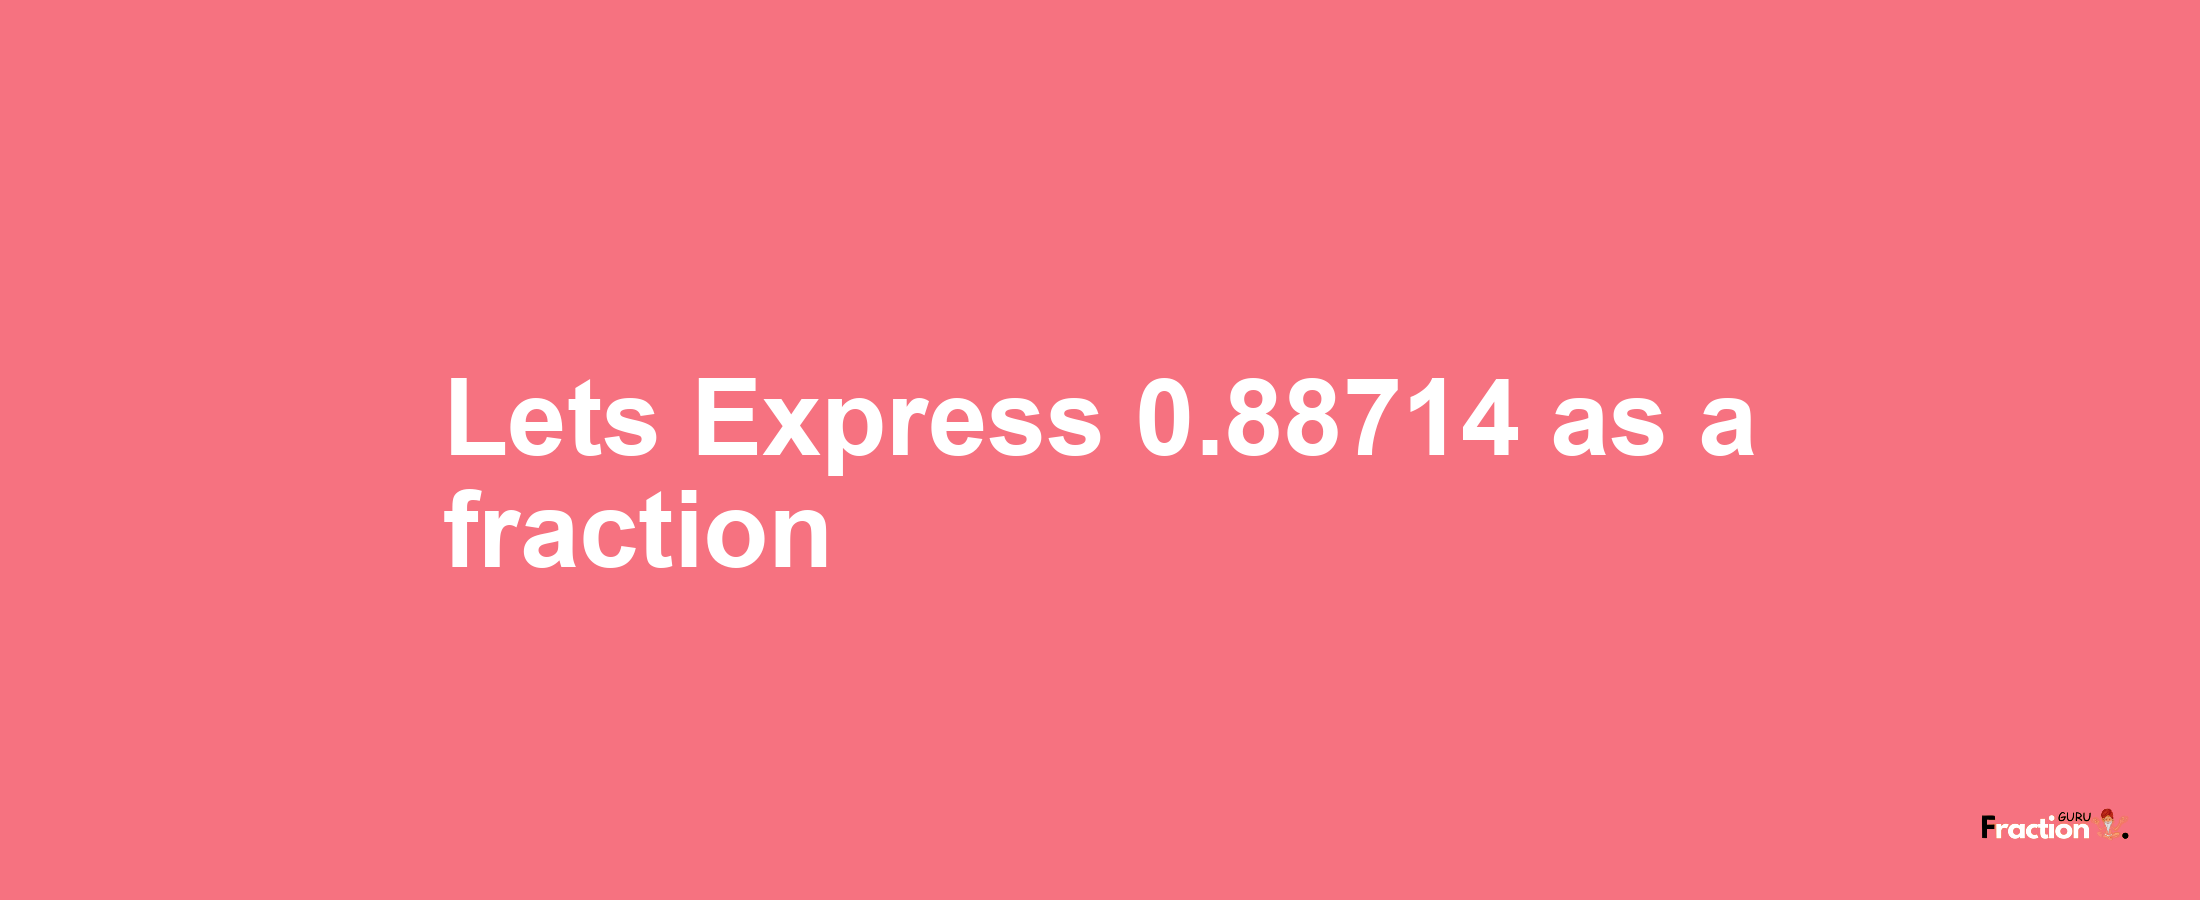 Lets Express 0.88714 as afraction